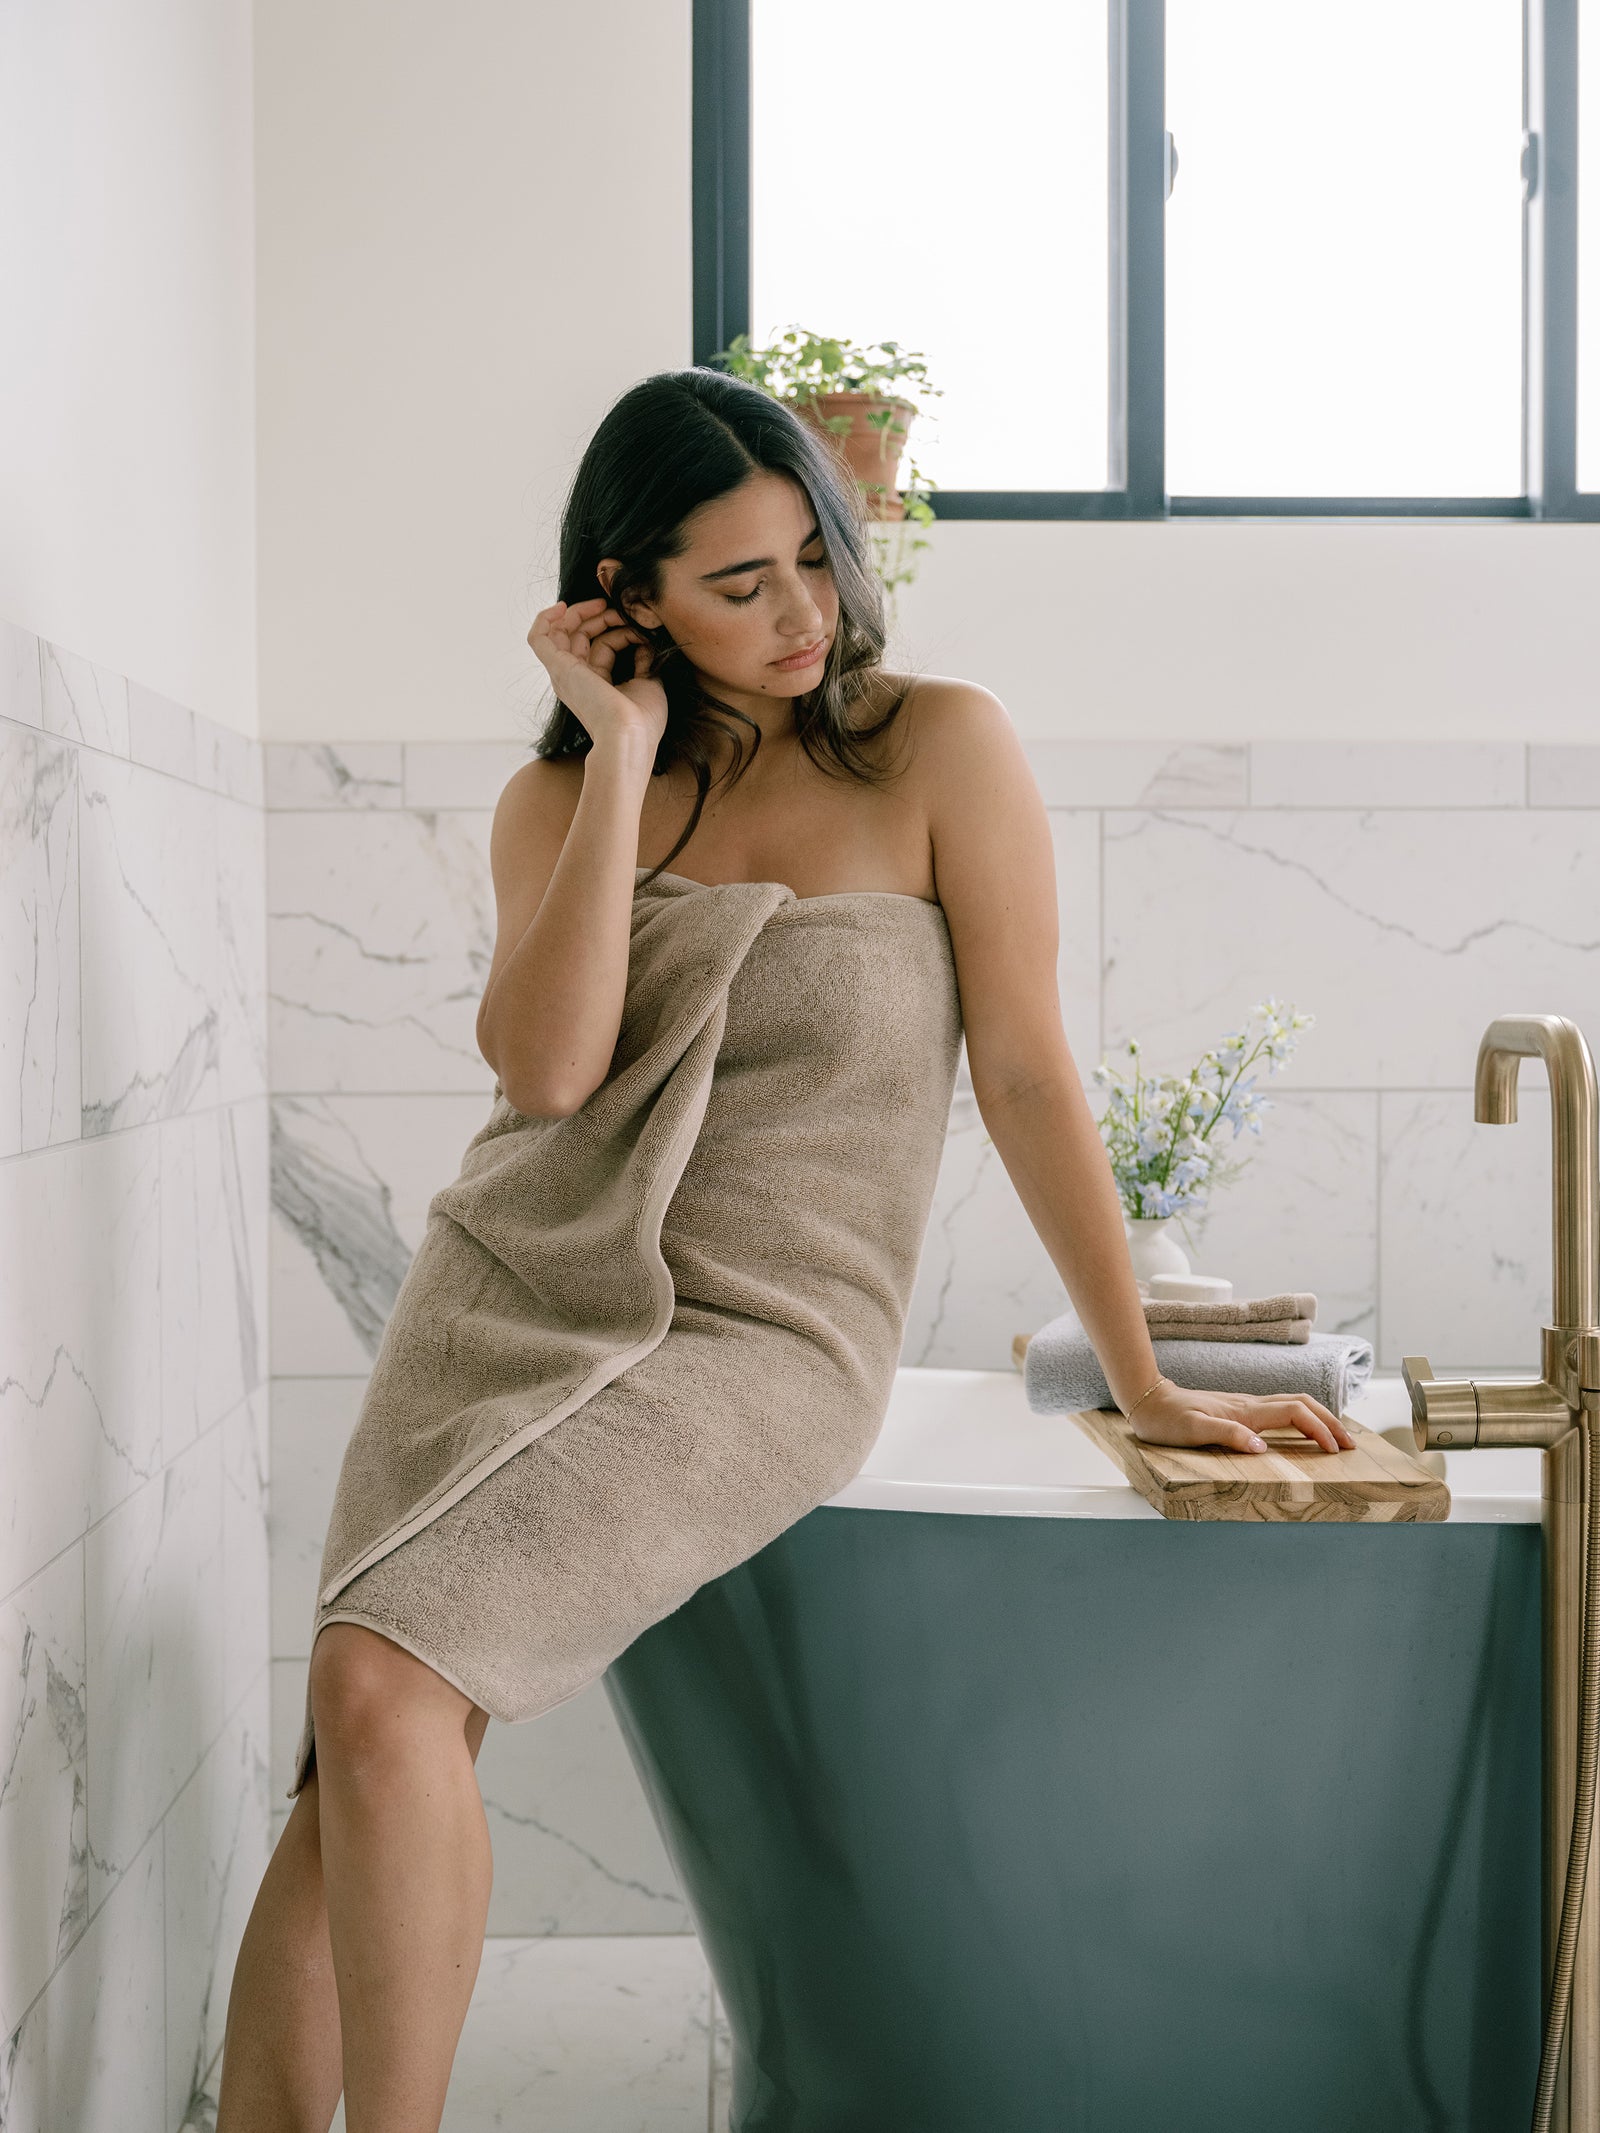 Premium Plush Bath Towel in the color Sand. Photo of Sand Premium Plush Bath Towel taken in a bathroom with a white tile backsplash. There is a brunette woman holding the towel close to her body as she sits on the bathtub. 